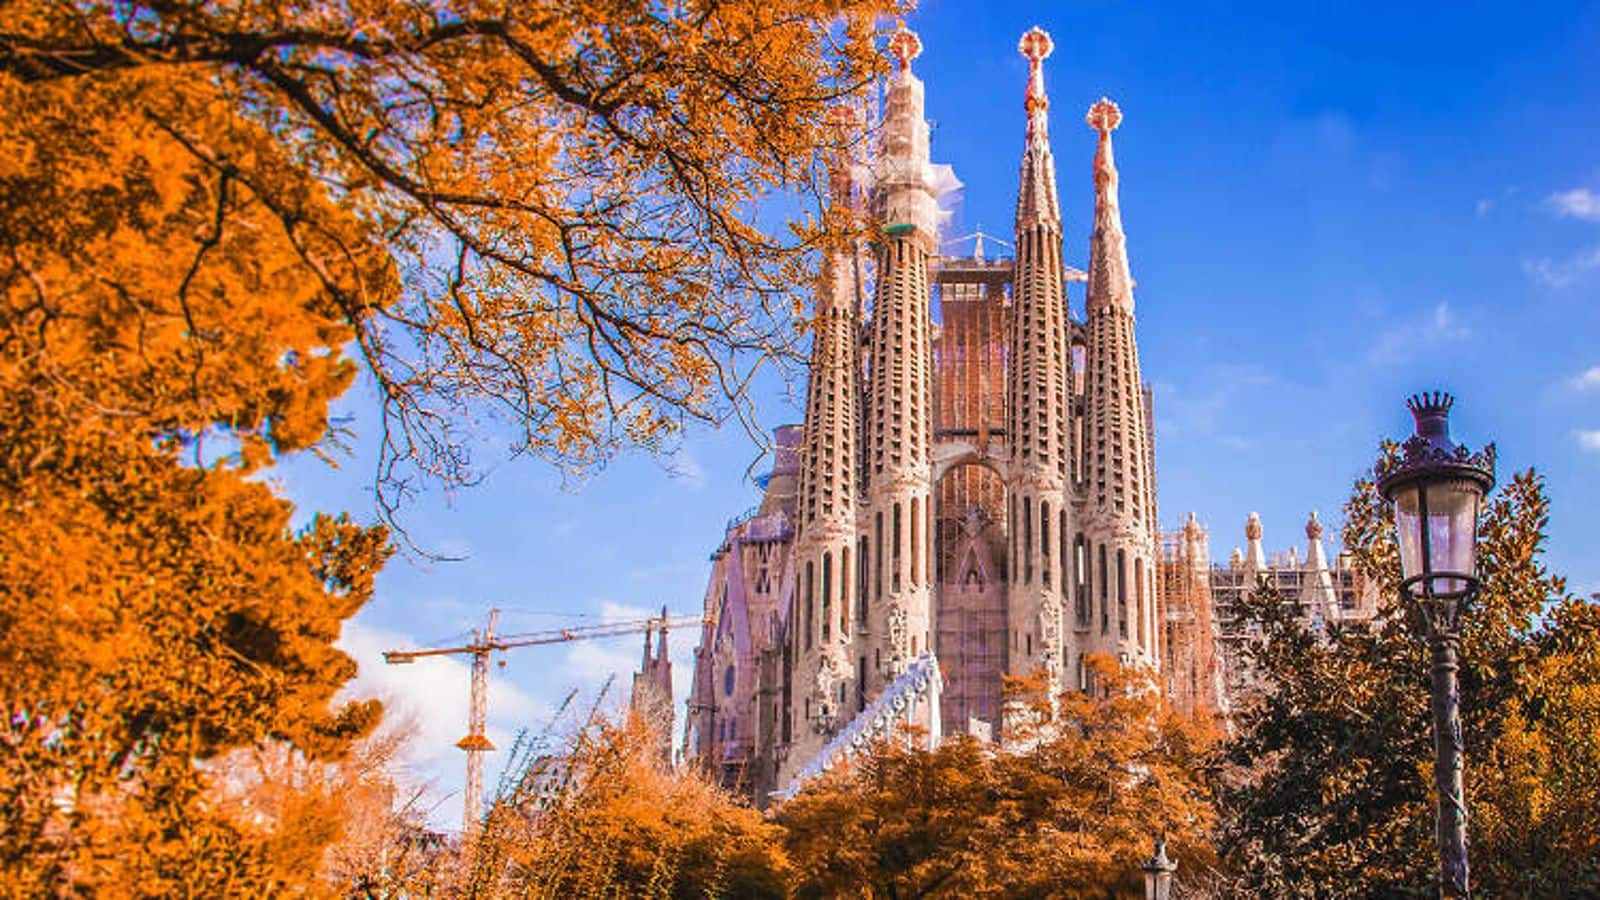 Barcelona's architectural mosaic discovery tour